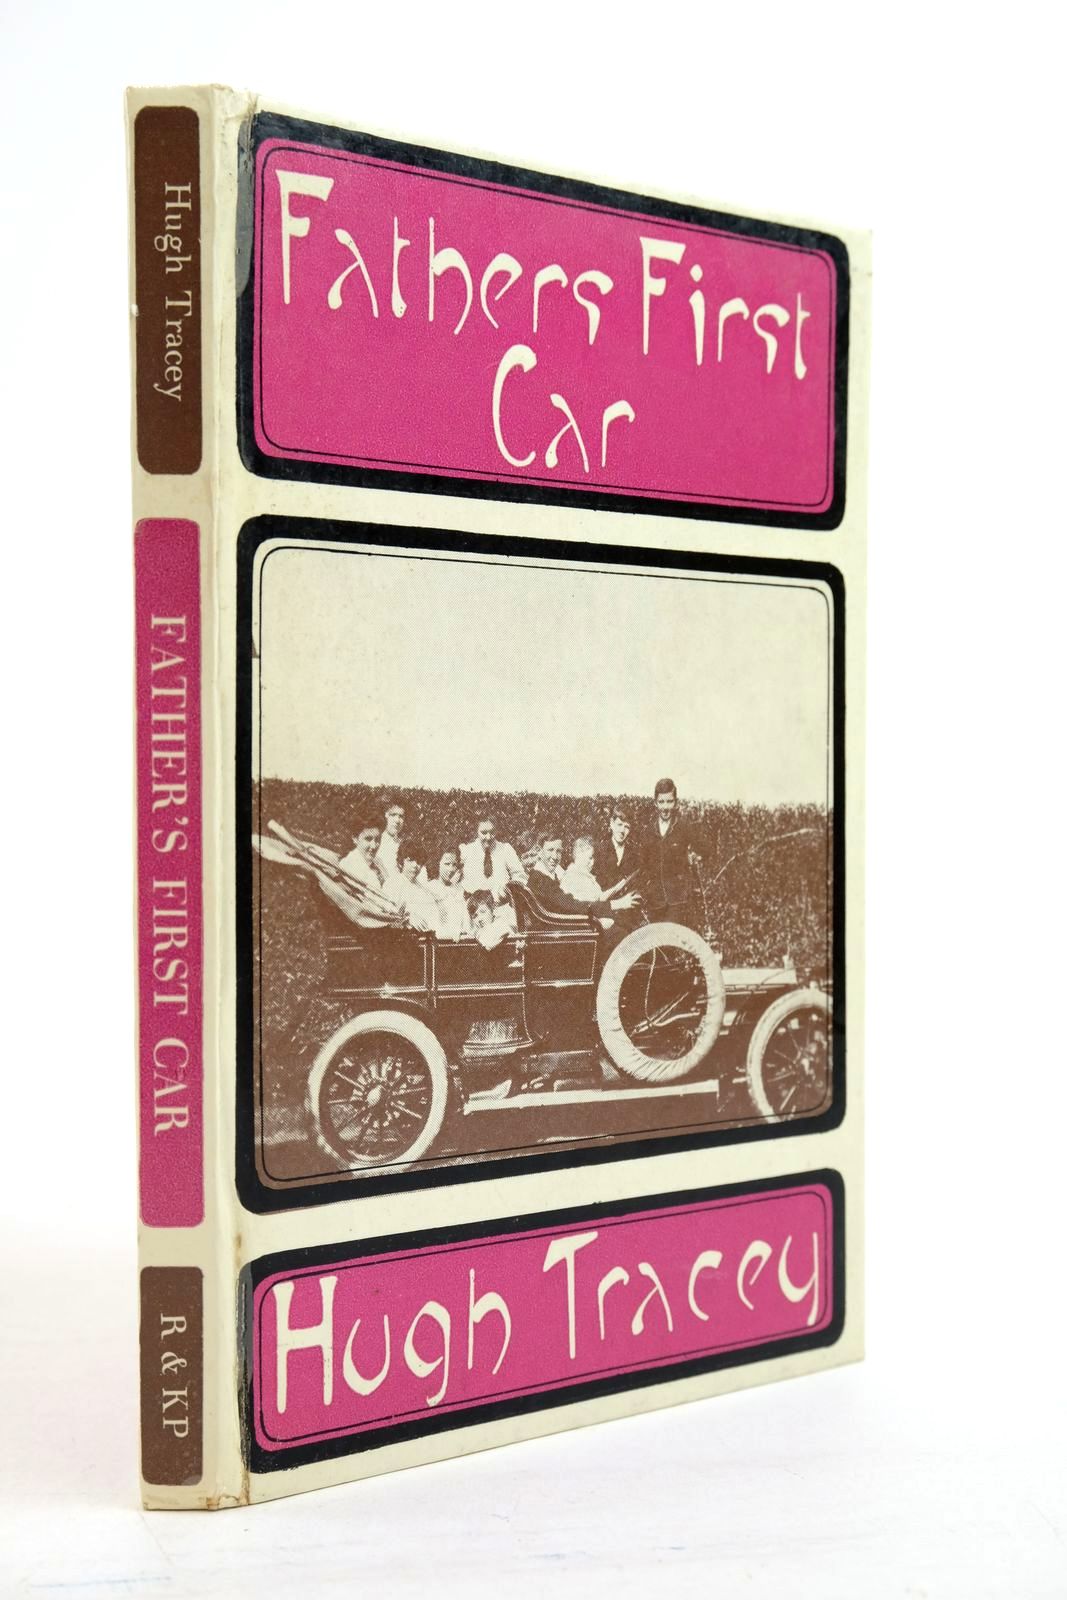 Photo of FATHER'S FIRST CAR written by Tracey, Hugh published by Routledge &amp; Kegan Paul (STOCK CODE: 2134602)  for sale by Stella & Rose's Books